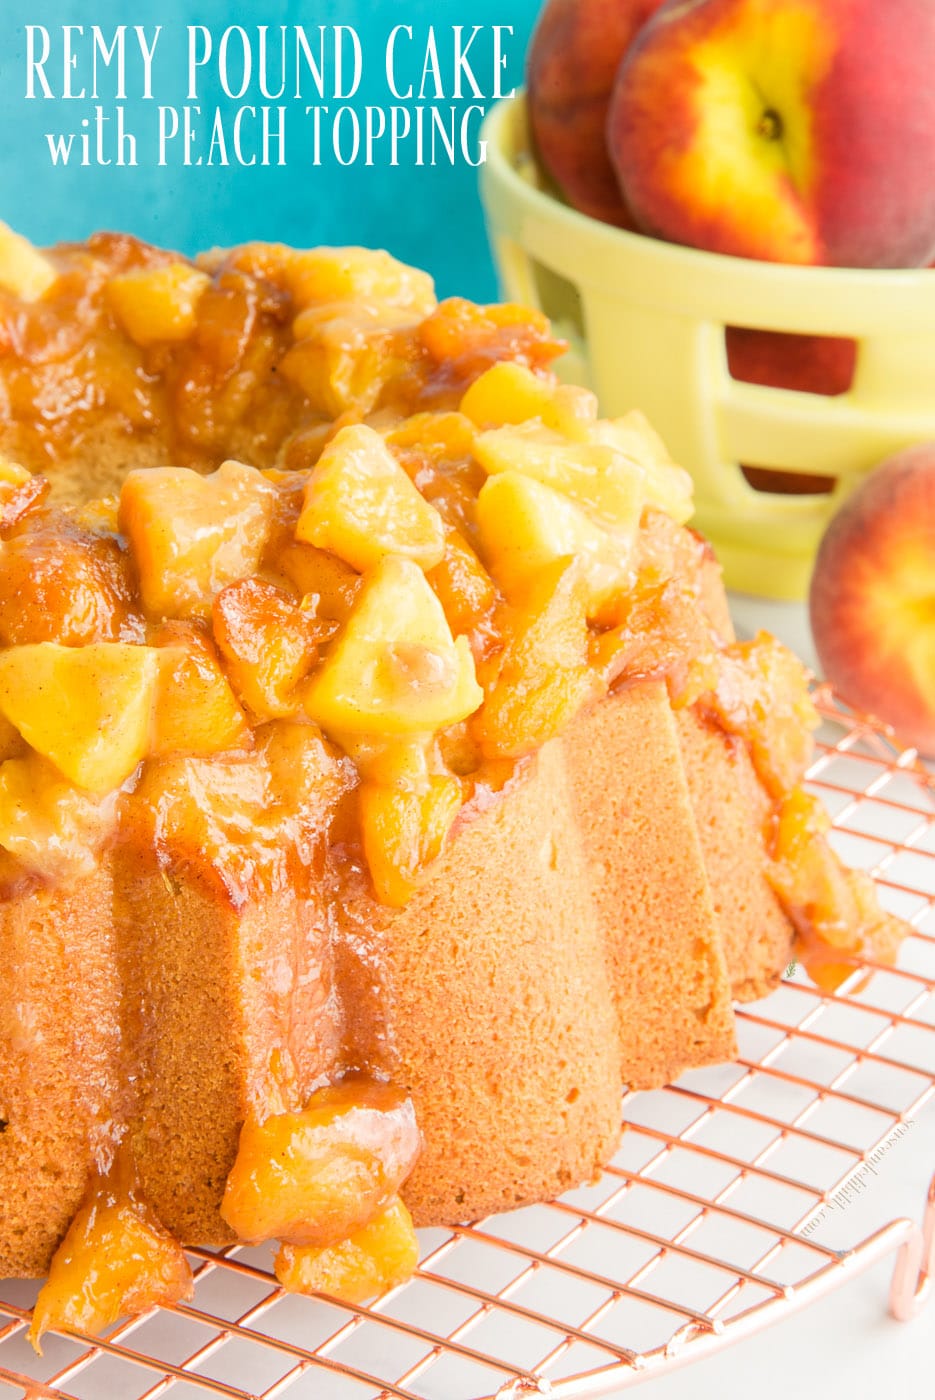 This Remy Pound Cake with Peach Topping has the vanilla and peach notes of the beloved champagne cognac, with the fruitiness of a fresh peach topping. Made with brown sugar, this pound cake is moist and fluffy and perfect for peach season. #remymartin #champagnecognac #peachpoundcake #poundcake #brownsugarpoundcake #cognacpoundcake #baking #bakingcakes #summerdessertrecipe #recetadepoundcake #bizcocho #BBQdessert via @ediblesense